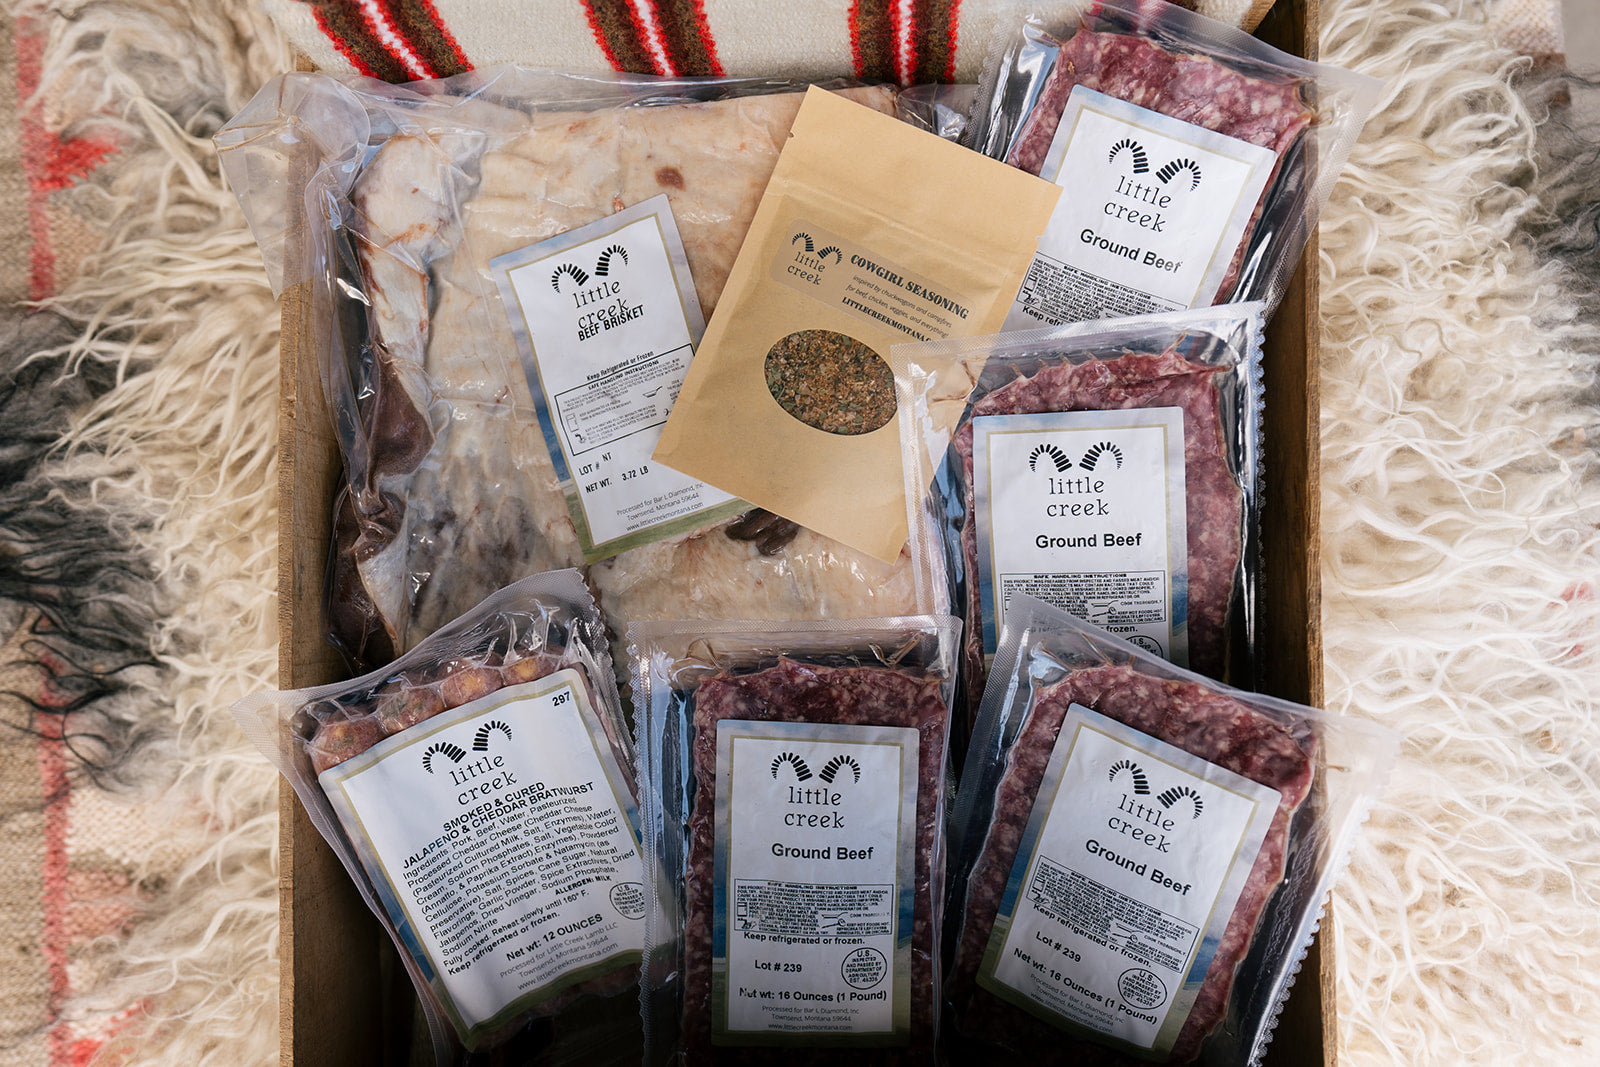 Farm Club Family Favorites Beef Subscription [LOCAL DELIVERY]